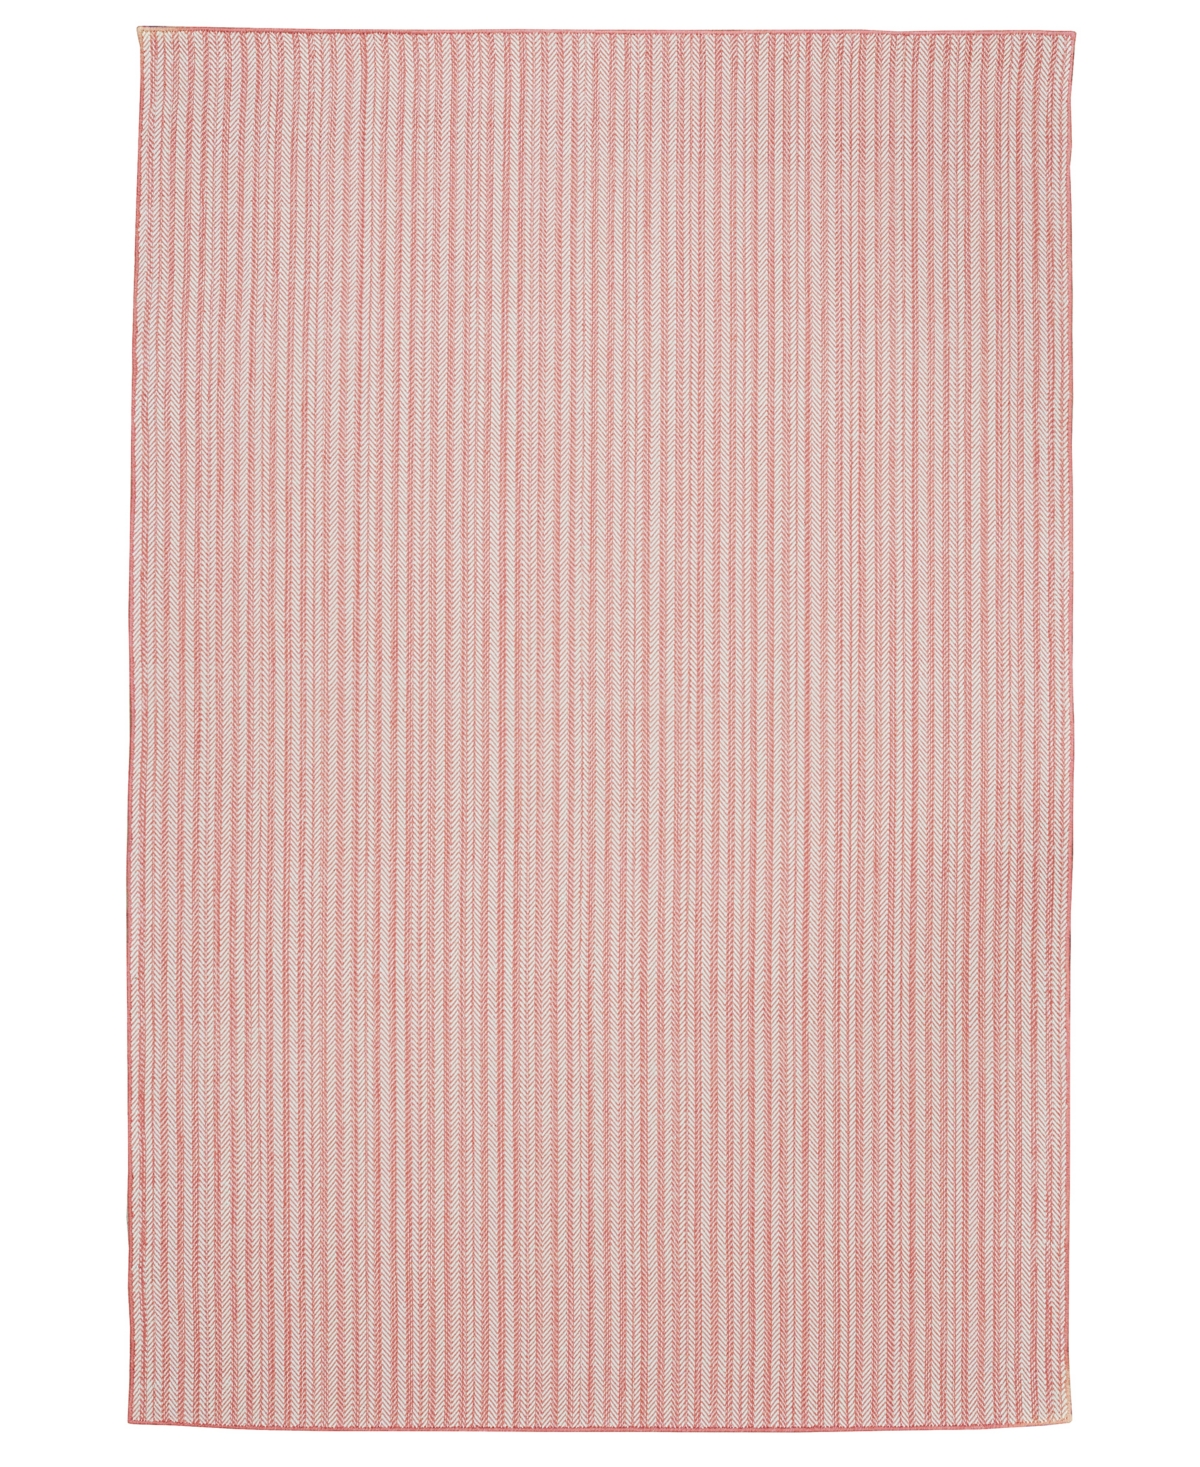 Km Home River Rvr-01 8' X 10' Area Rug In Coral